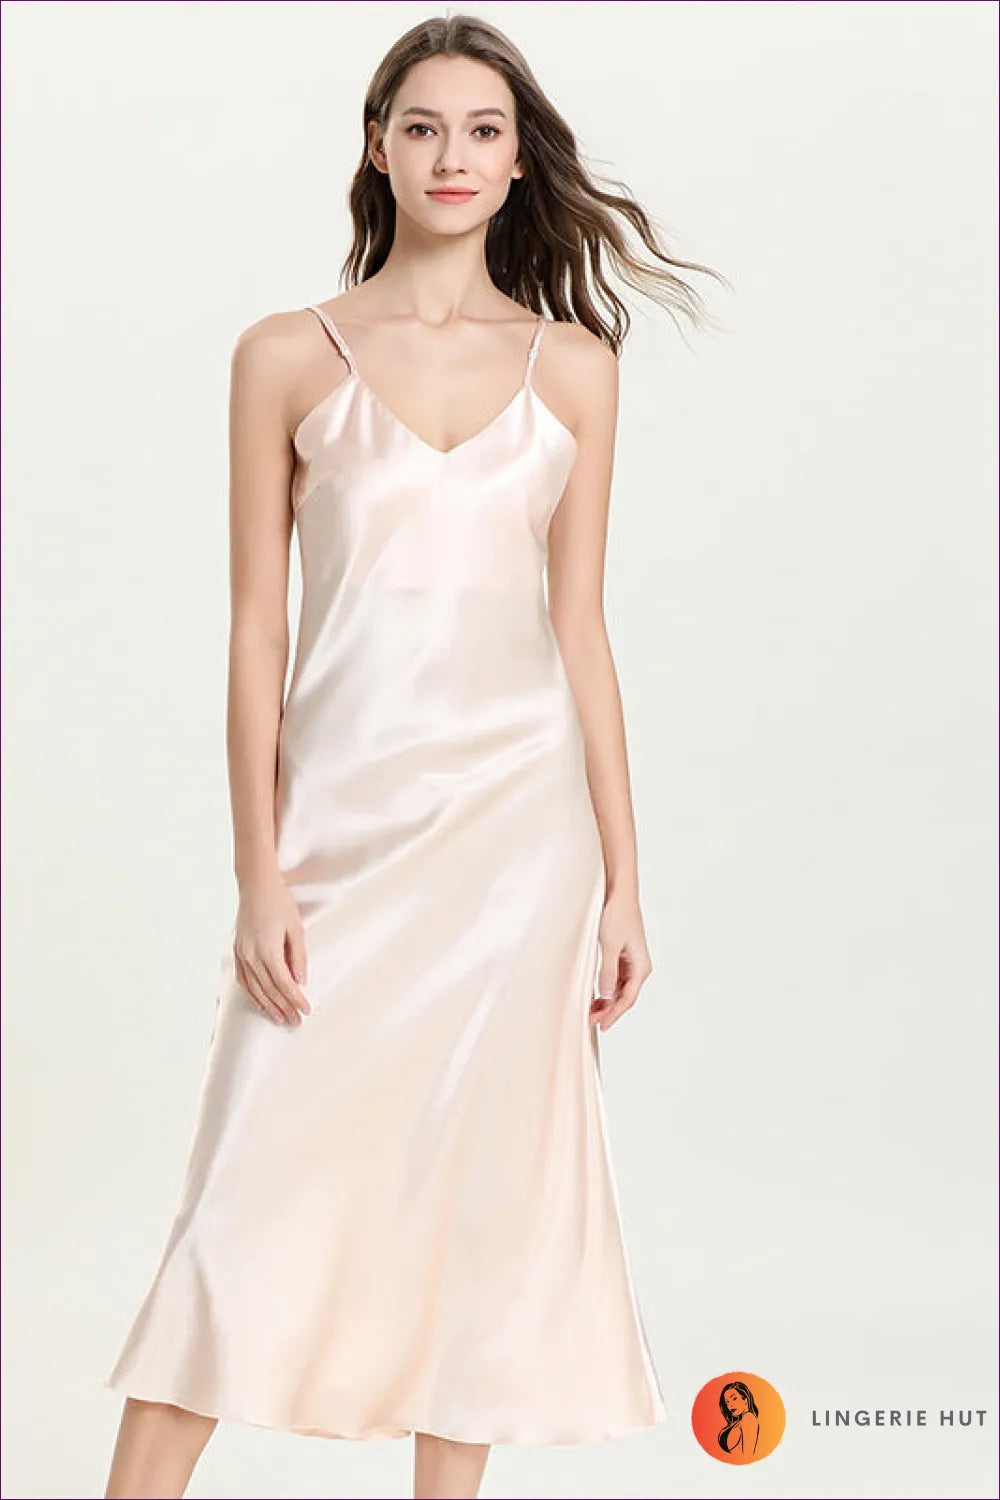 Slip Into a World Of Comfort And Allure With Our Sultry Satin Nightdress. Designed Flattering V-neck Crafted